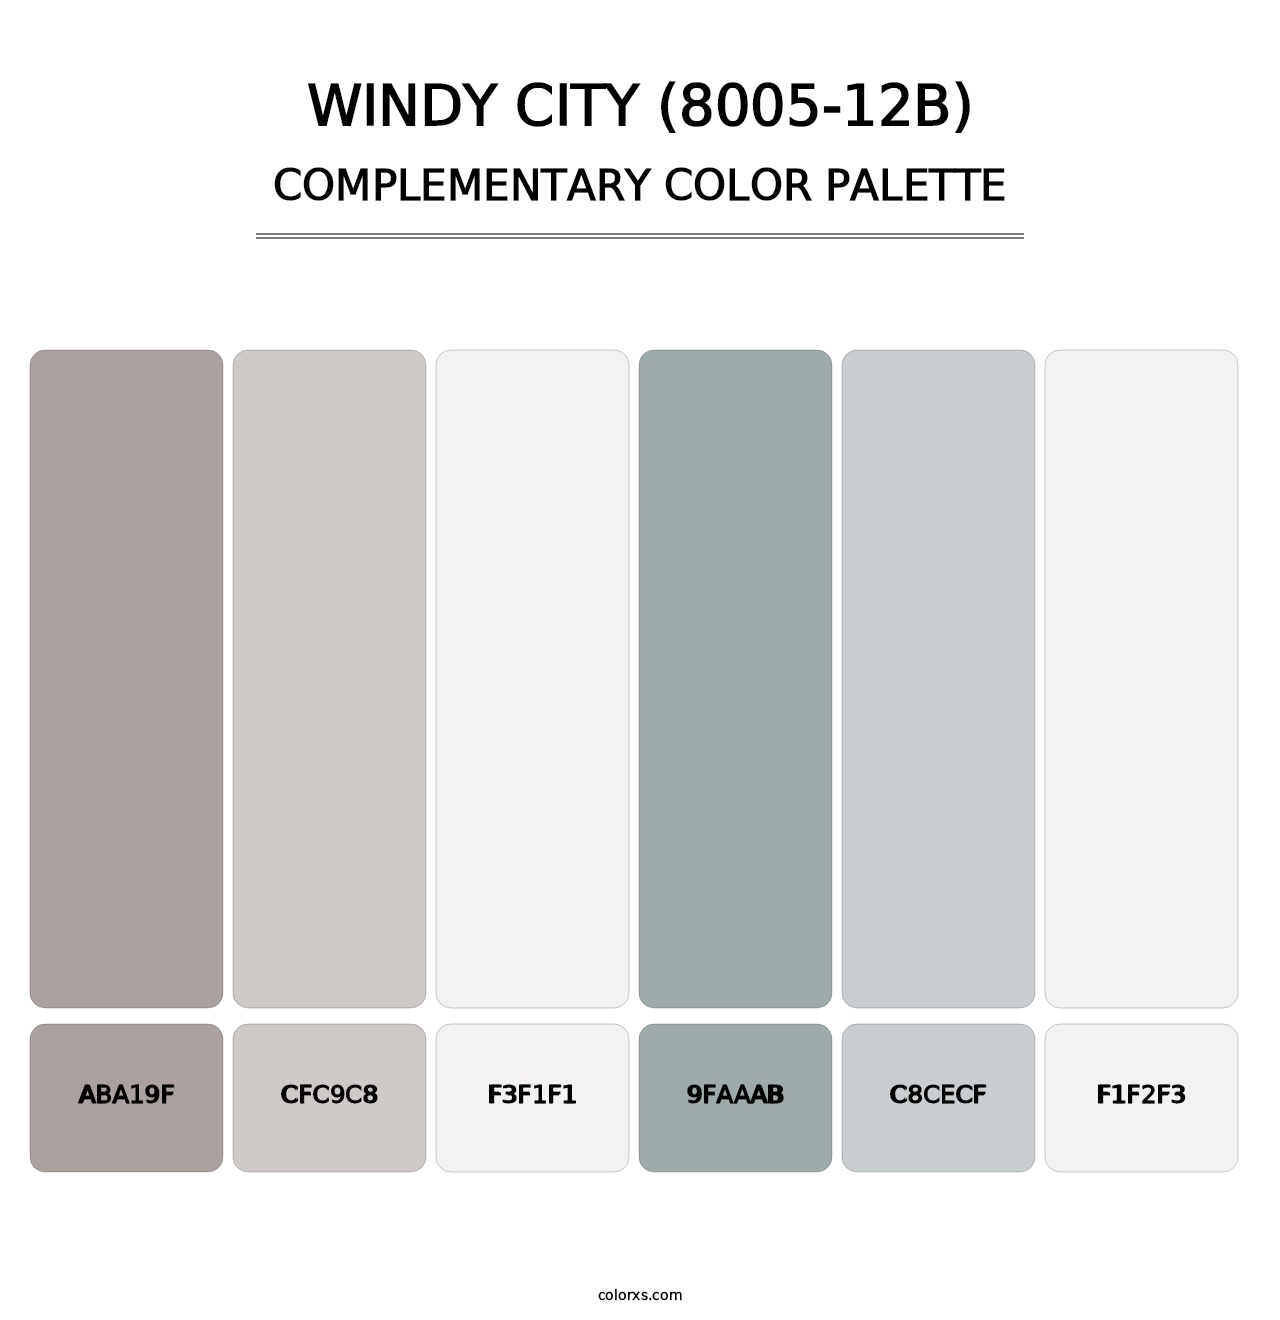 Windy City (8005-12B) - Complementary Color Palette